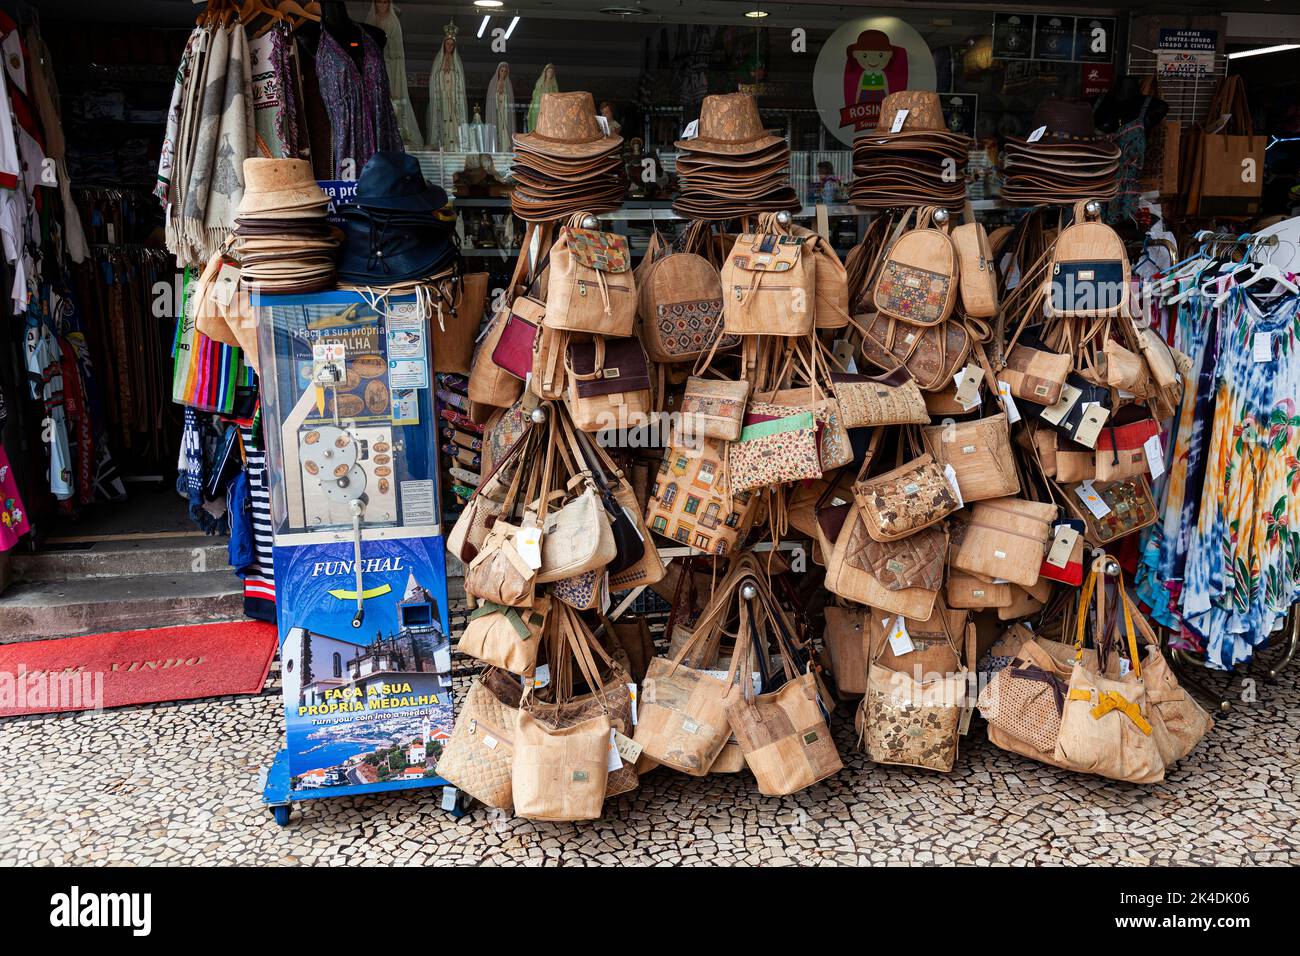 Souvenir stand selling hats ,Funchal, Madeira, Portugal, Europe Stock Photo